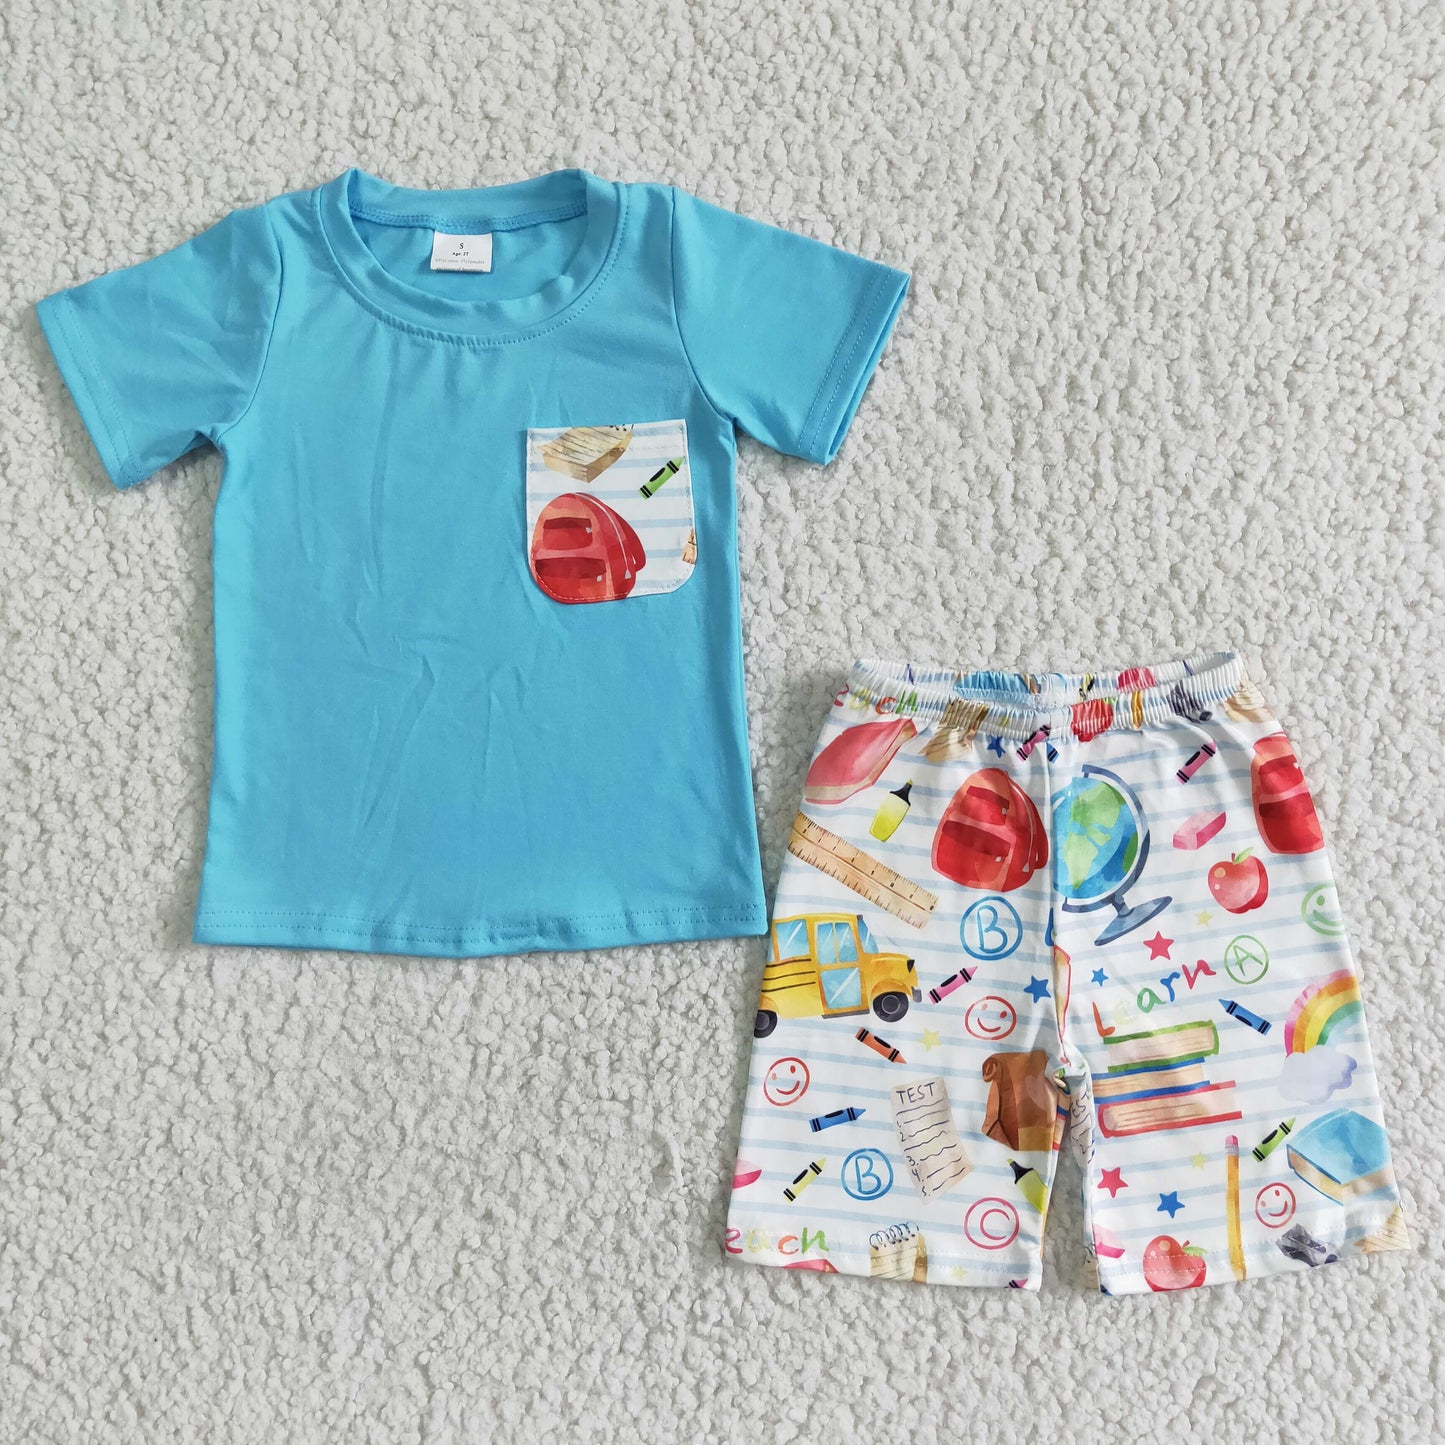 Boys back to school outfits   BSSO0071